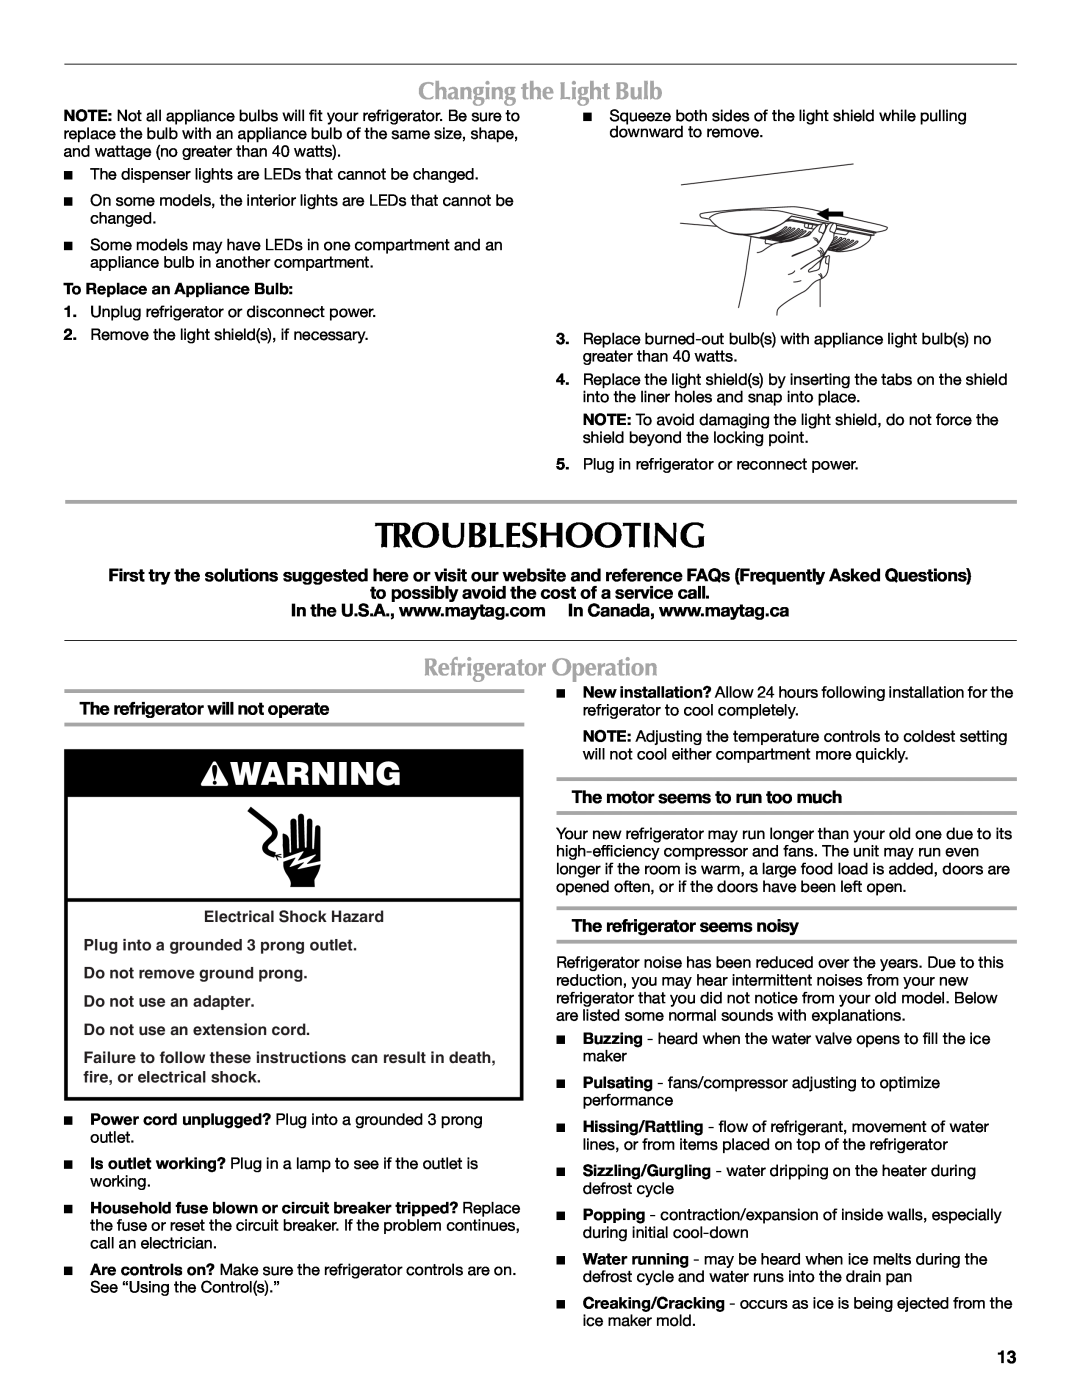 Maytag UKF8001AXX-200 Troubleshooting, Changing the Light Bulb, Refrigerator Operation, The refrigerator will not operate 